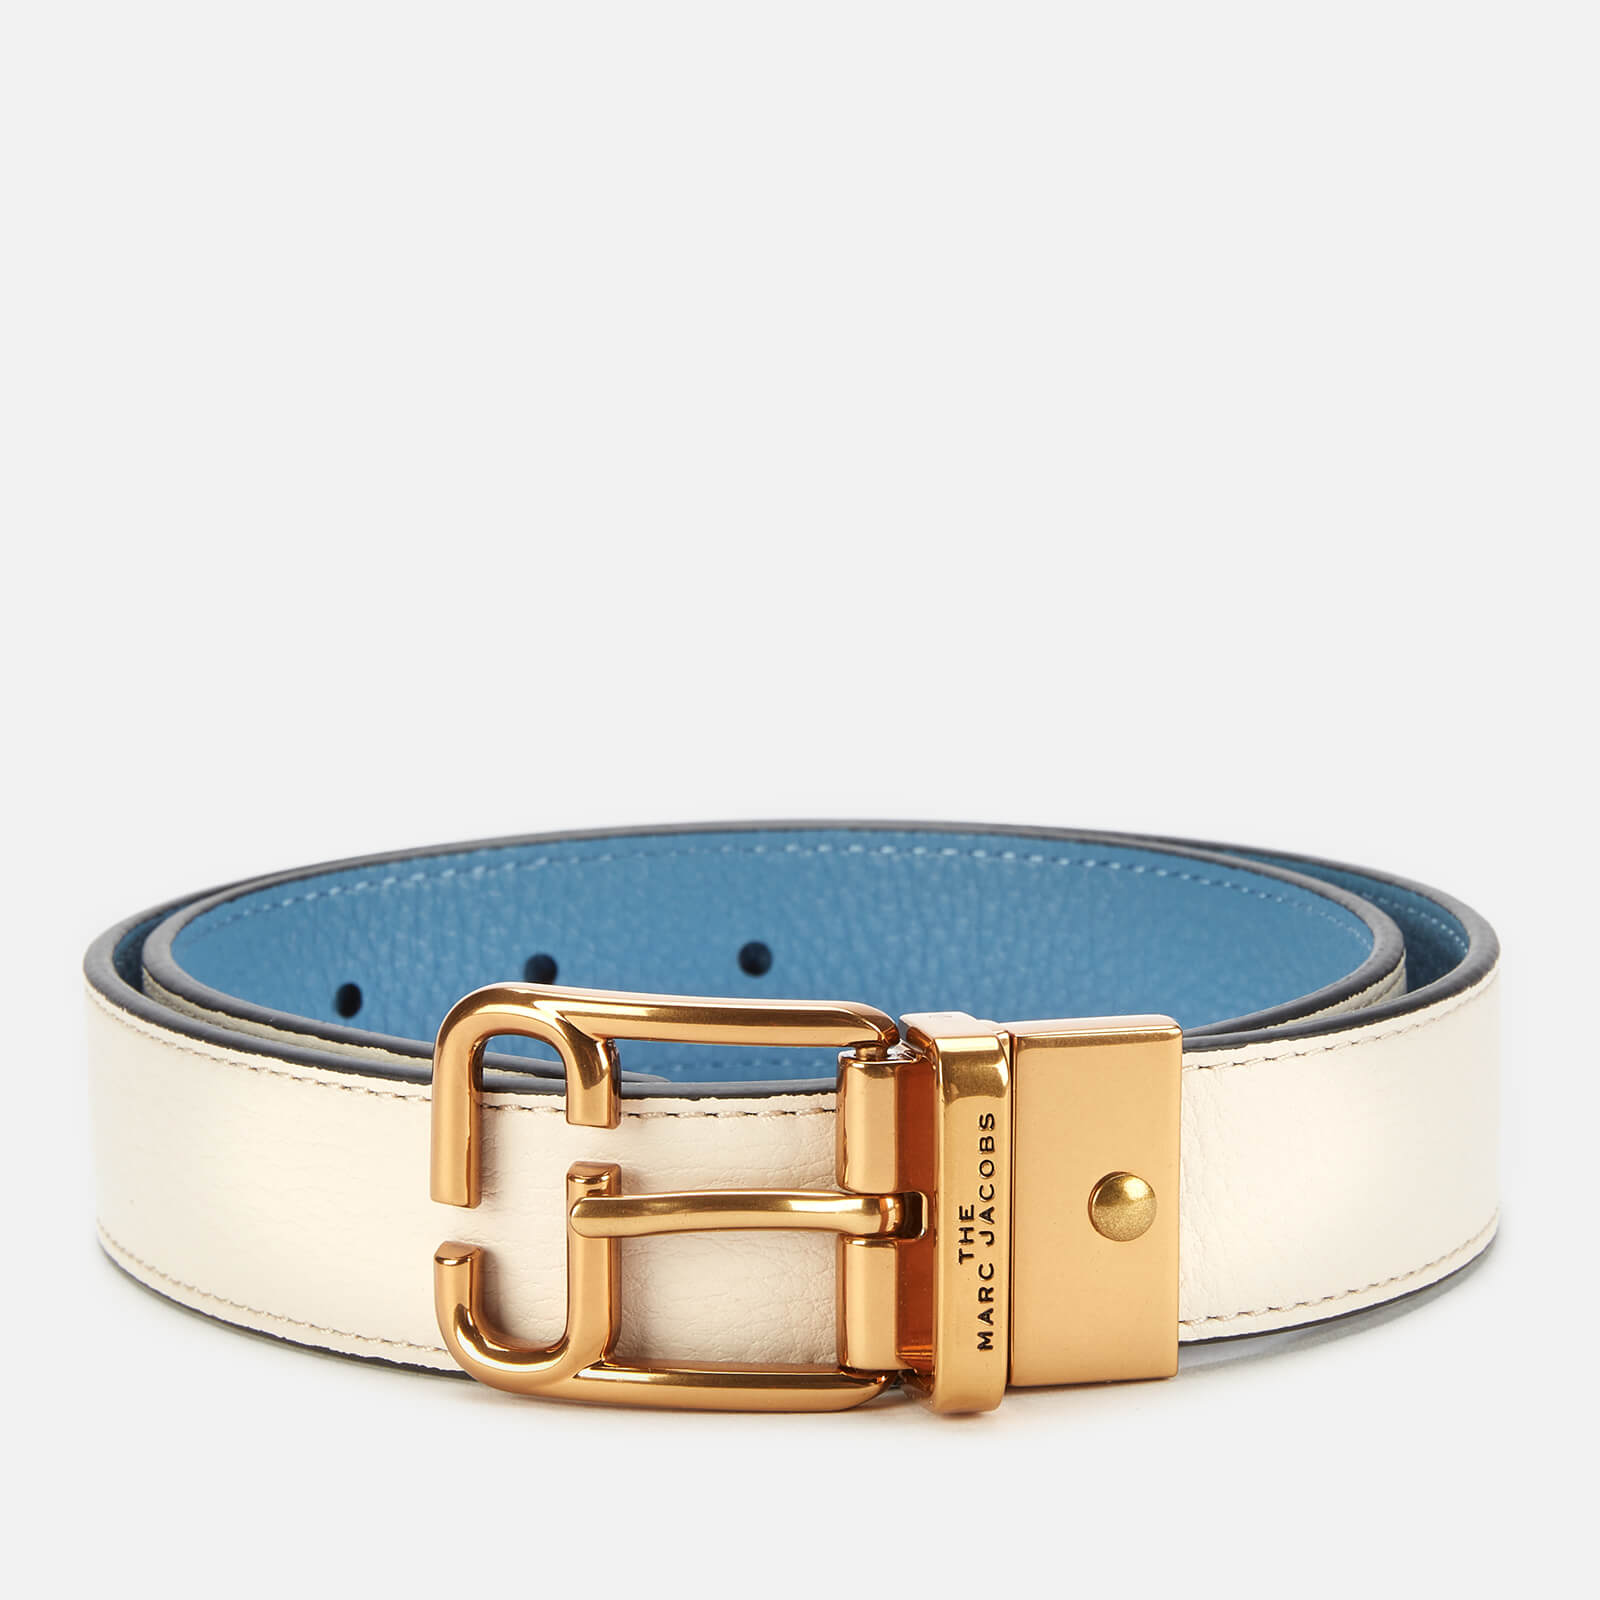 Marc Jacobs Women's Reversible Belt - Ivory/Country Blue - XS/S